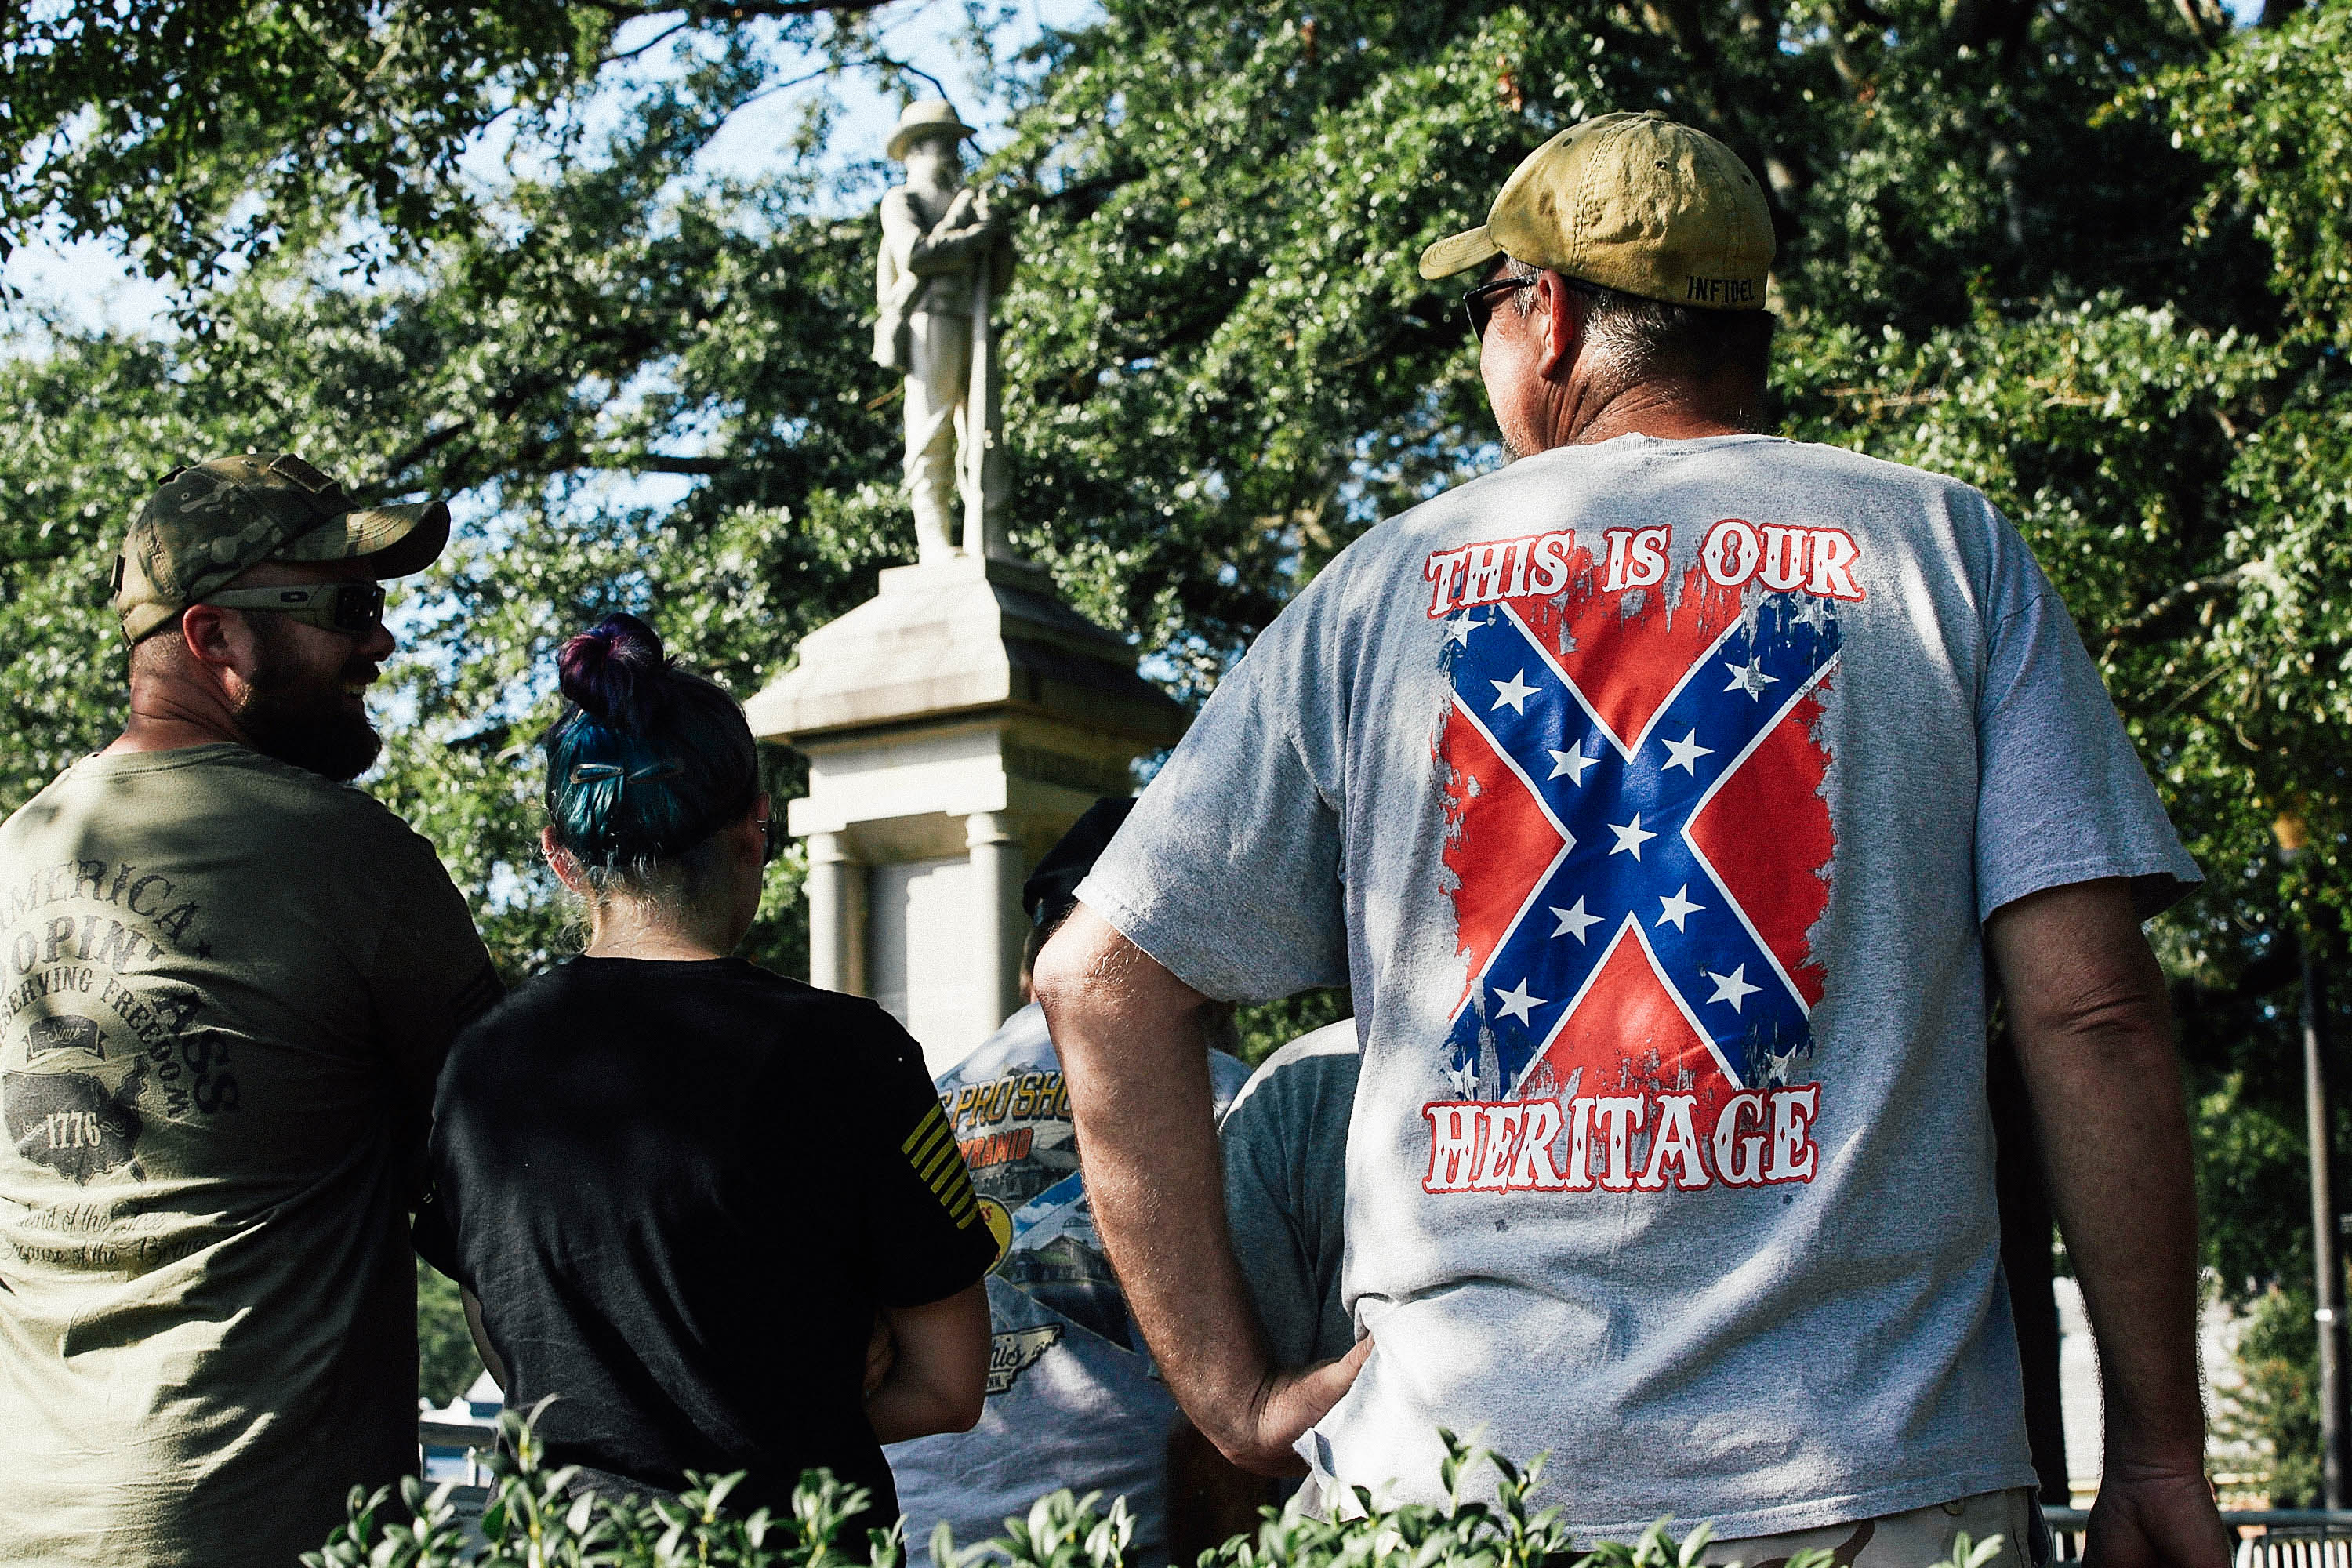 A man wearing a T-shirt with the words "This is our heritage" around the Confederate battle flag stands in front of a Confederate statue among other statue supporters.